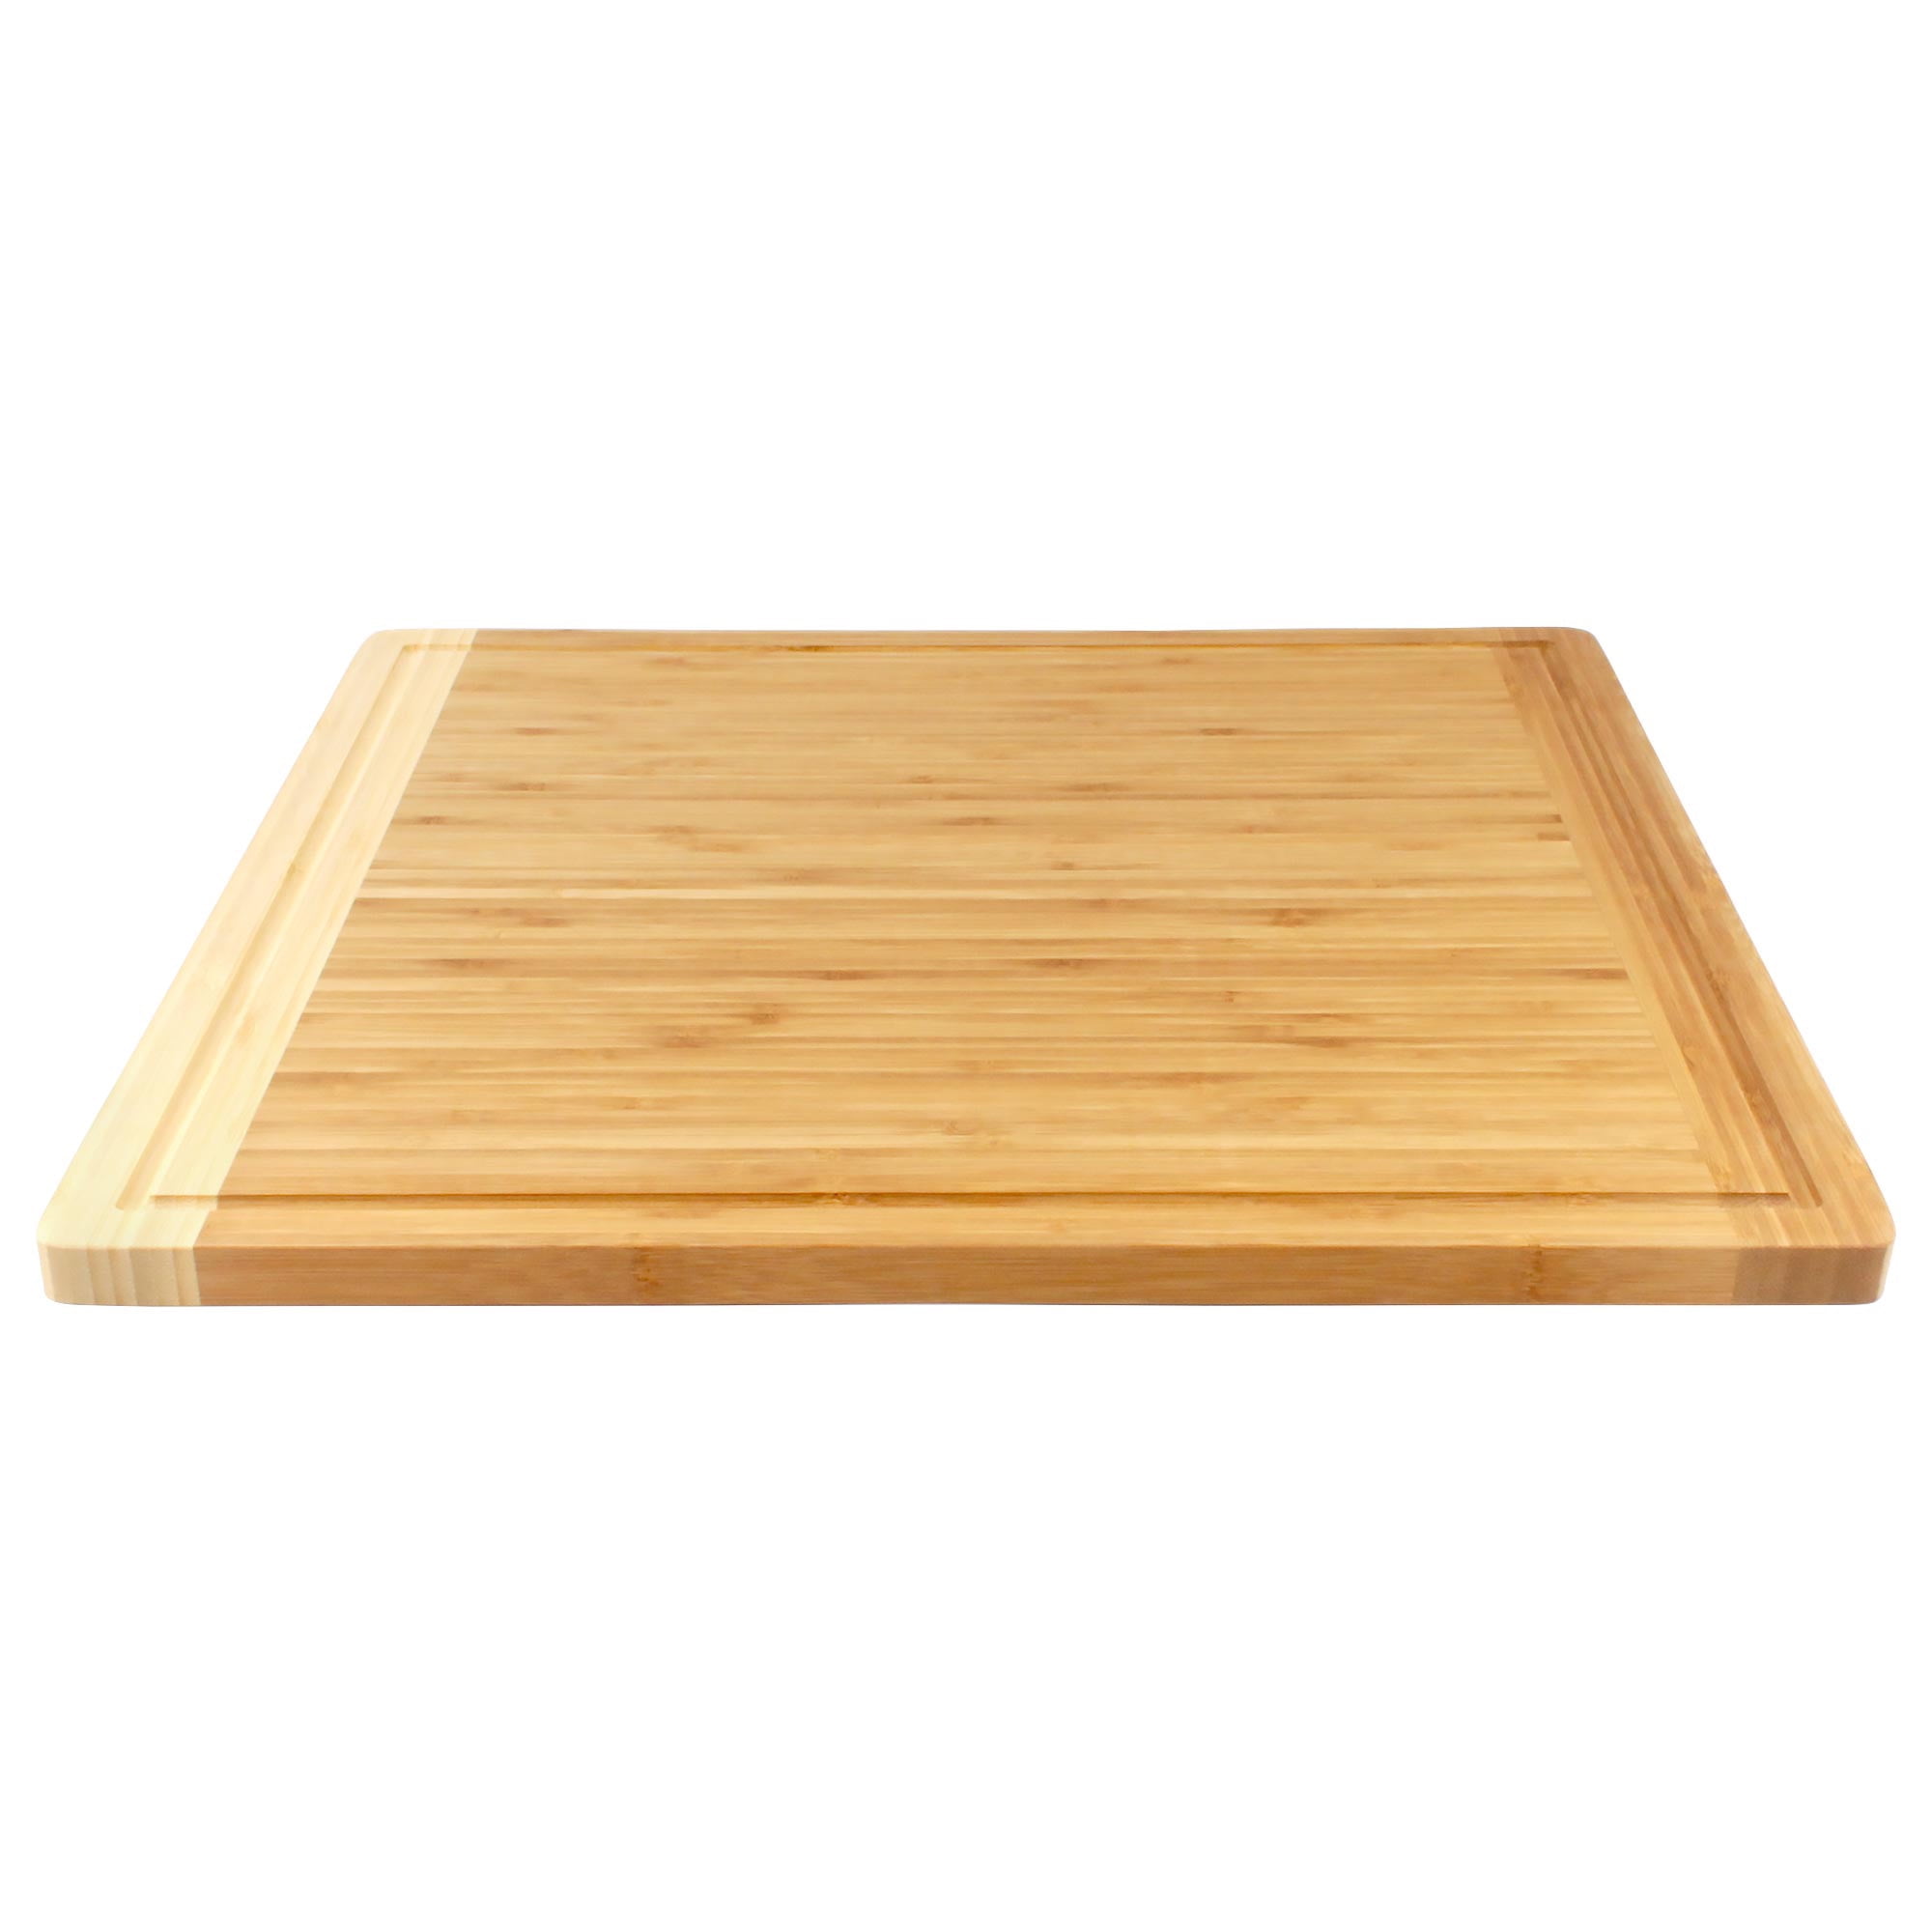 Lomana Large Stainless Steel Cutting Board Non-Slip “L” Shape